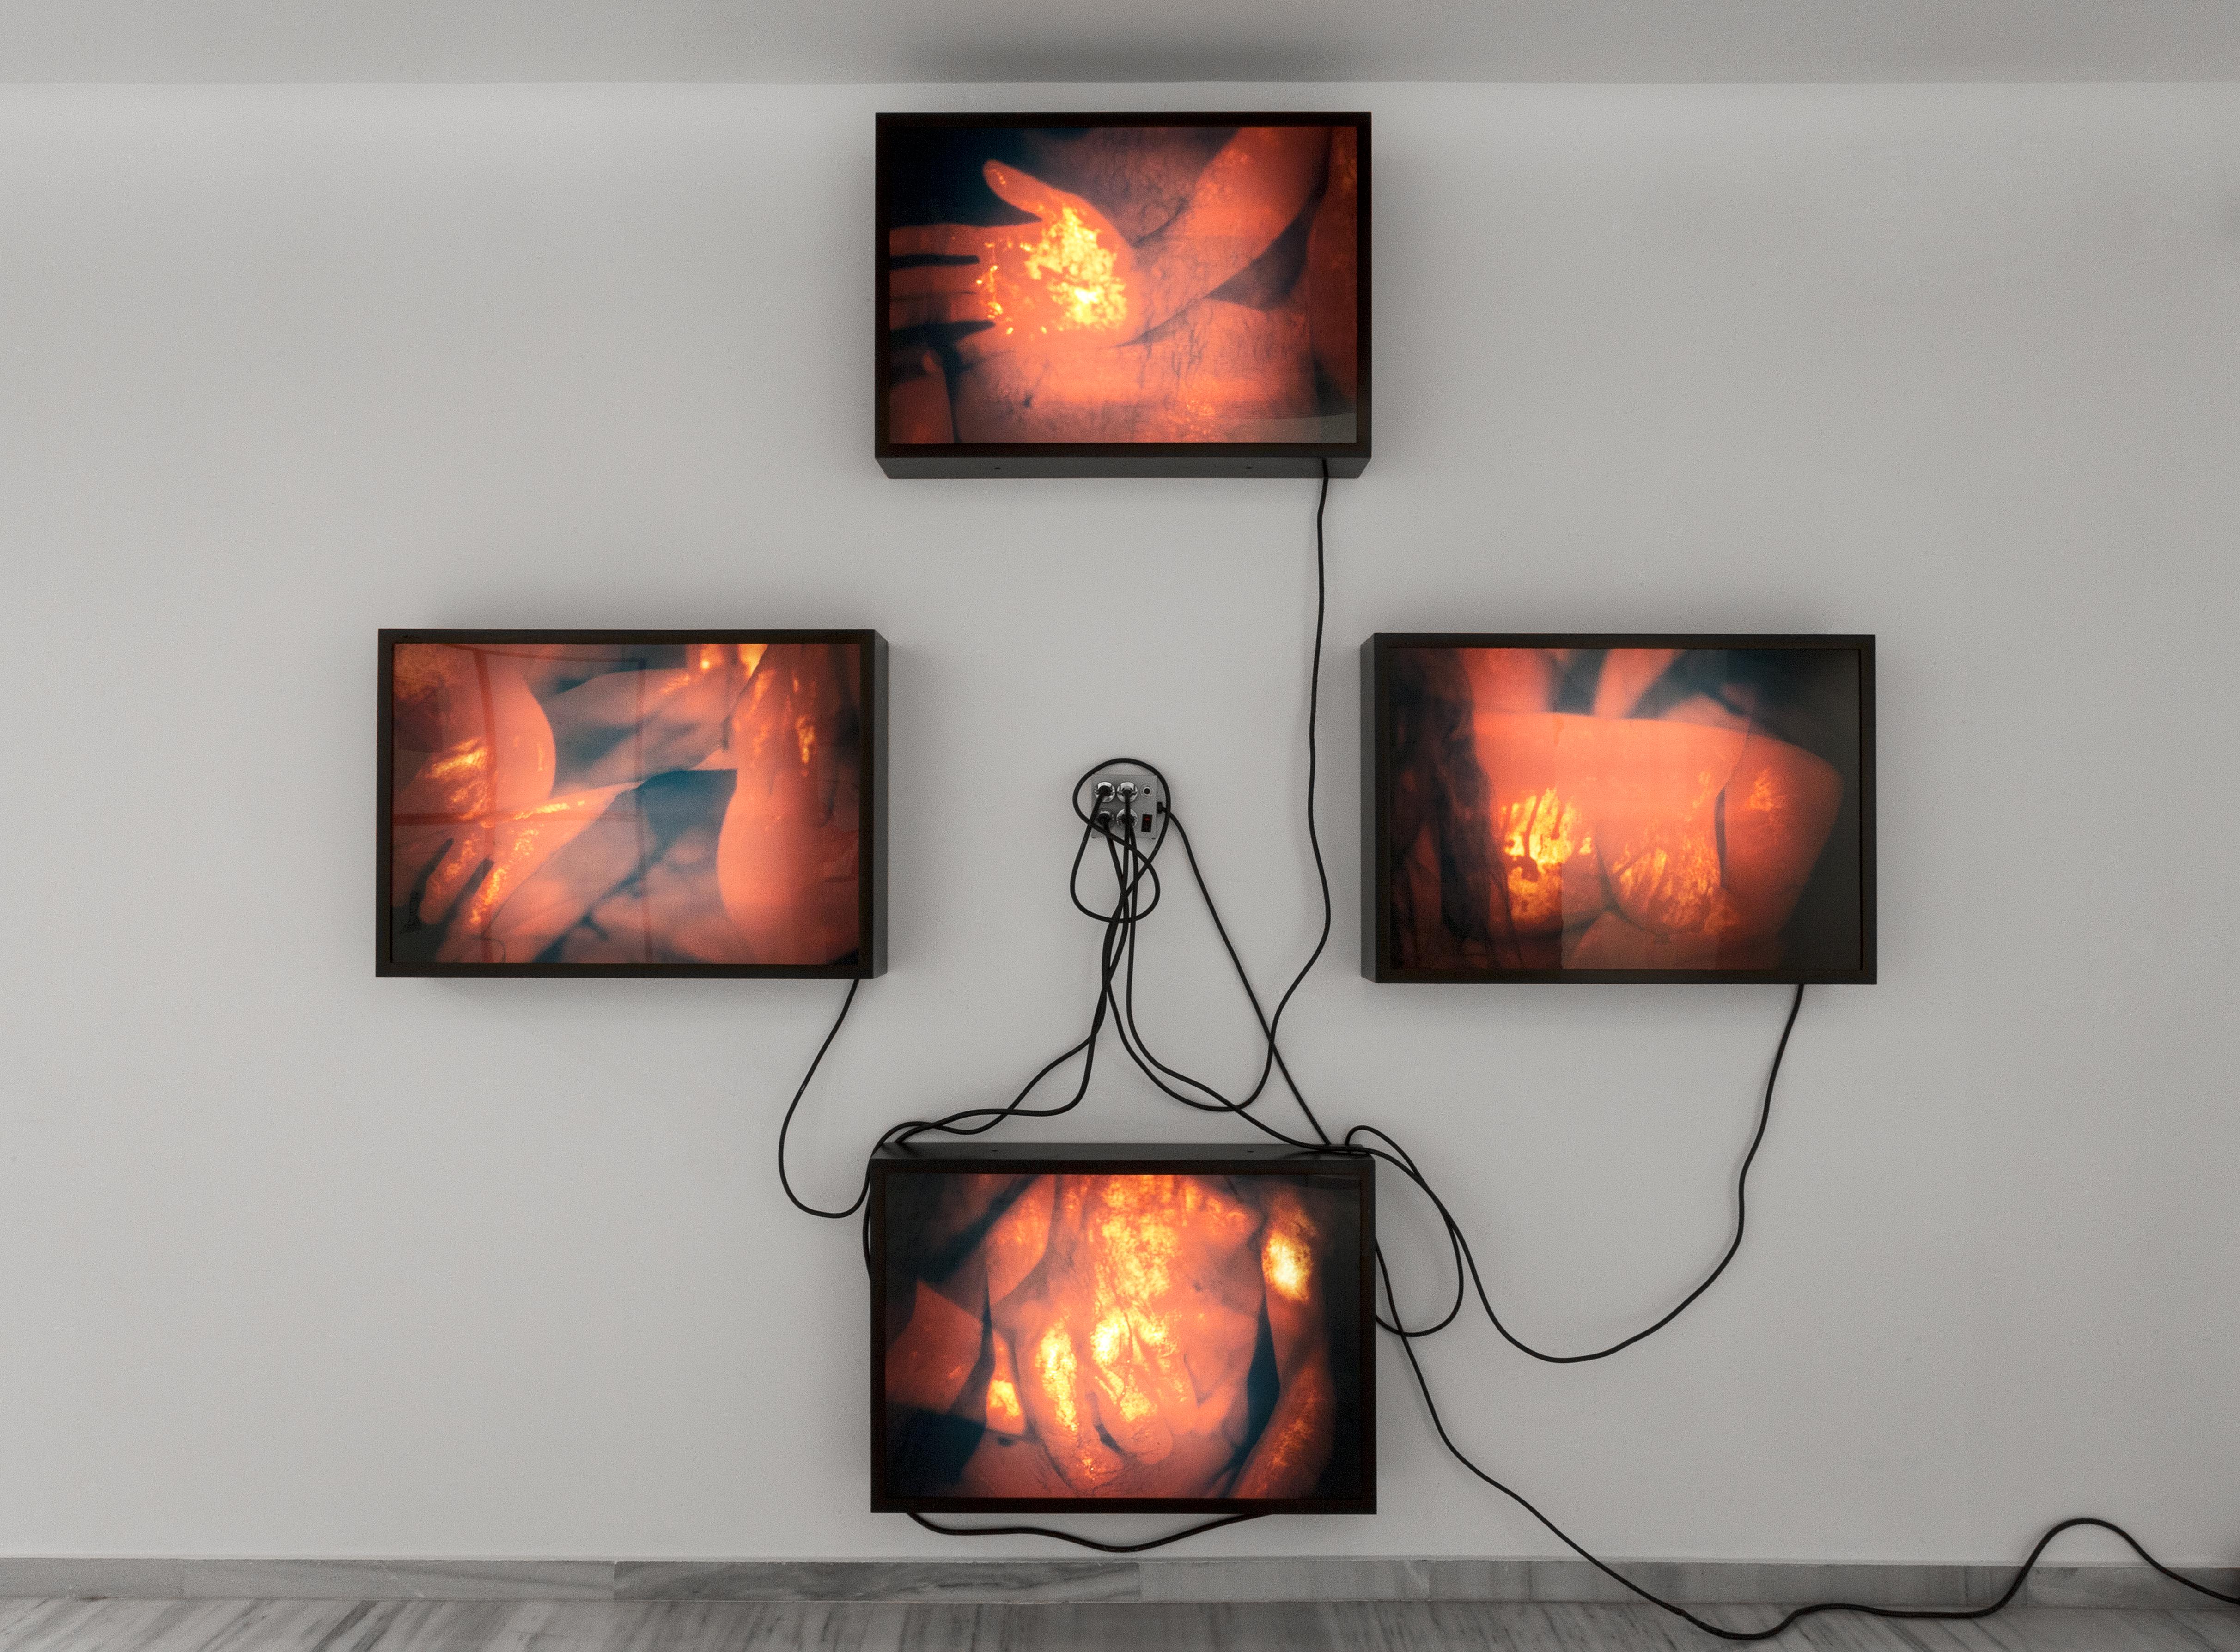 four lightboxes displaying abstract warm-toned images, arranged in a cross with cords dangling